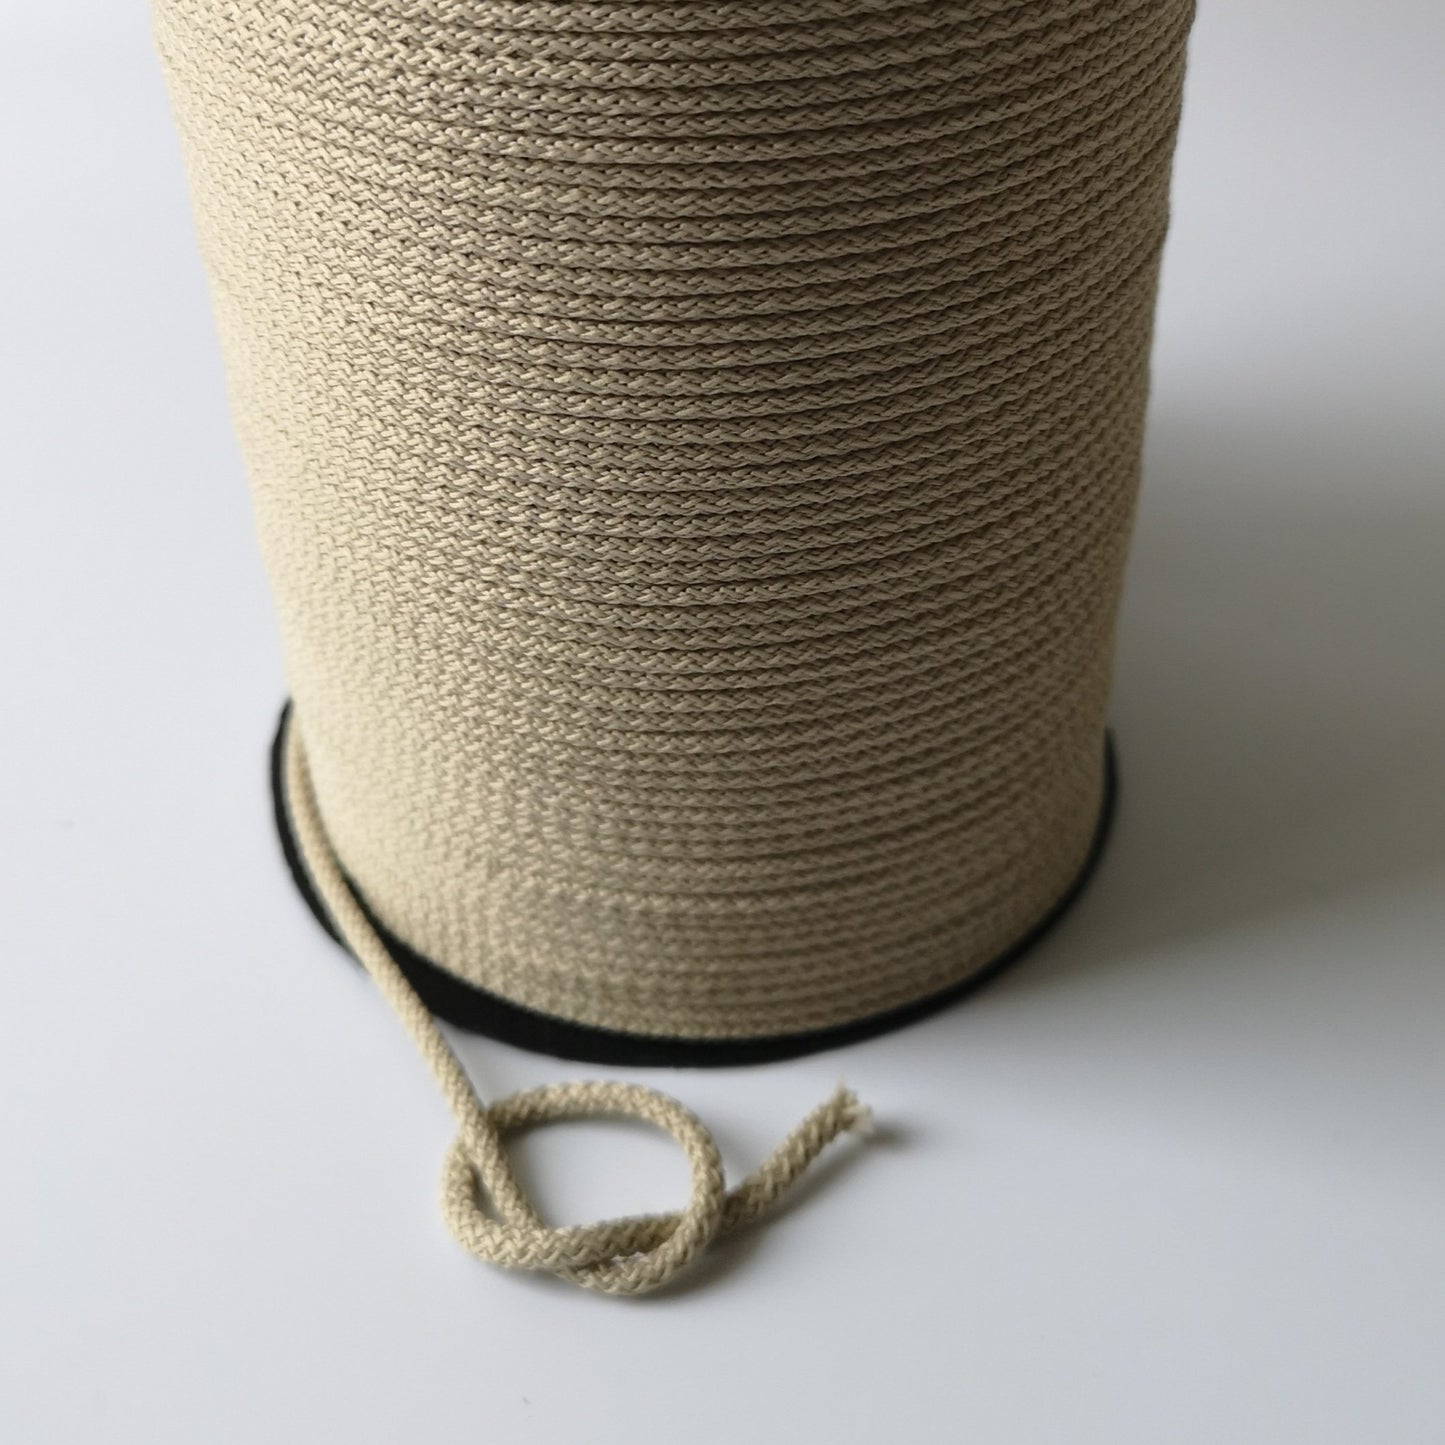 3mm ivory strong rope